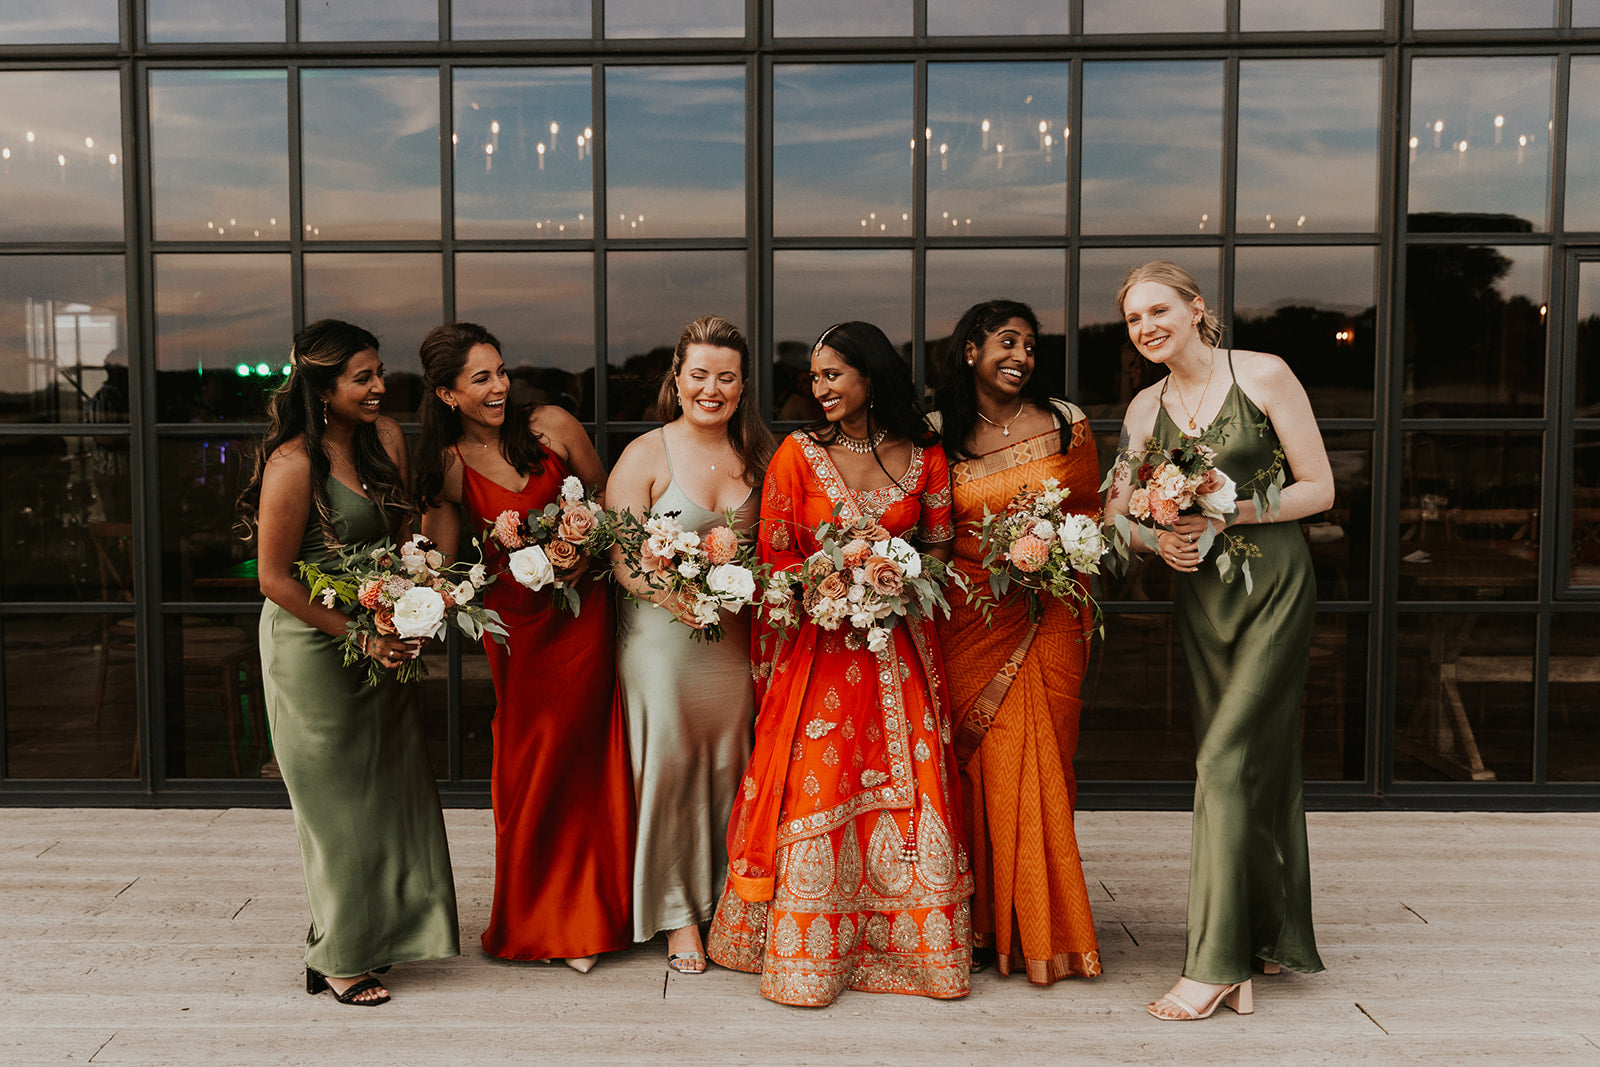 A bridal party of 6 females including the bride, dressed in orange and green bridesmaids dresses with the bride in an orange South Asian Lehenga.